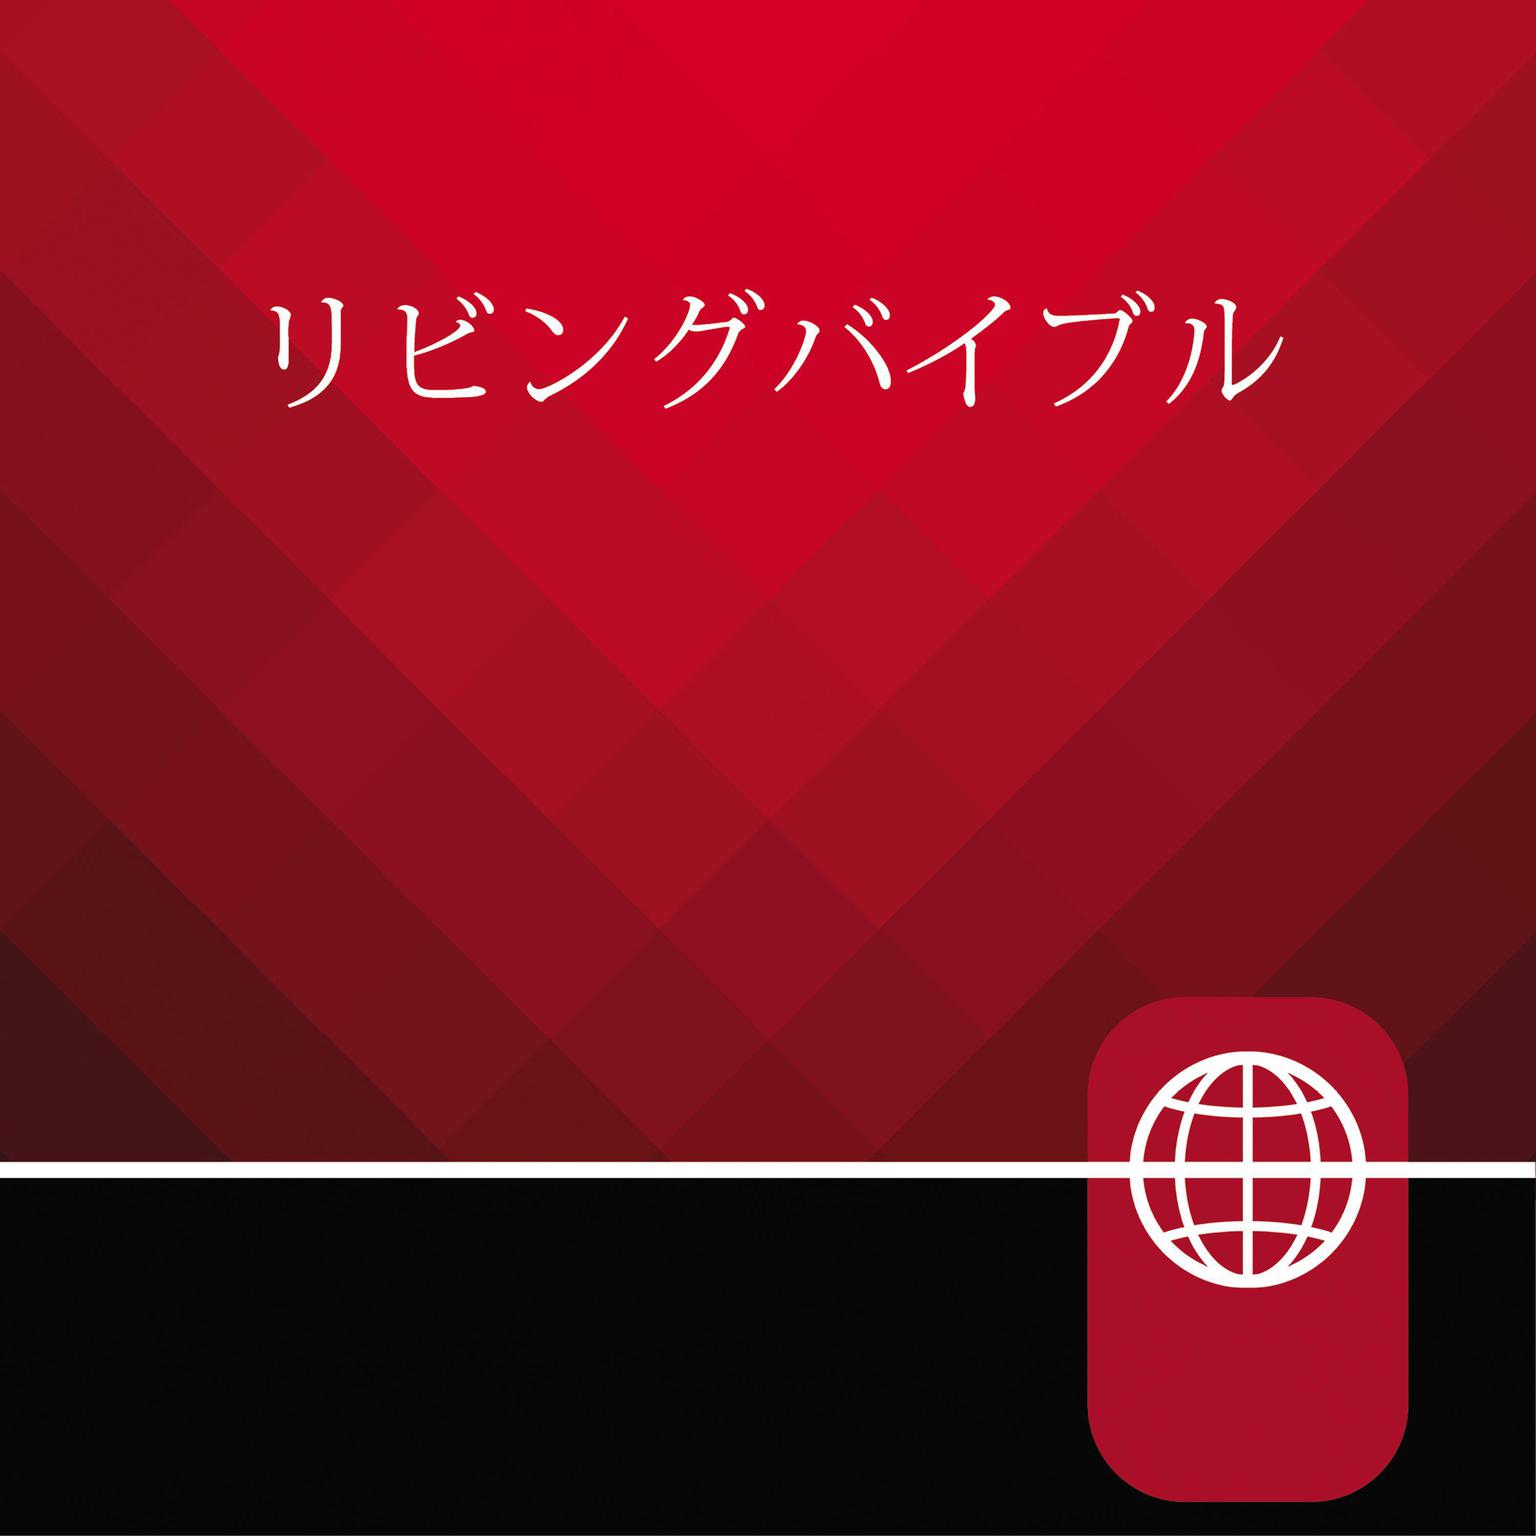 Japanese Audio Bible - Japanese Contemporary Bible Audiobook, by Zondervan